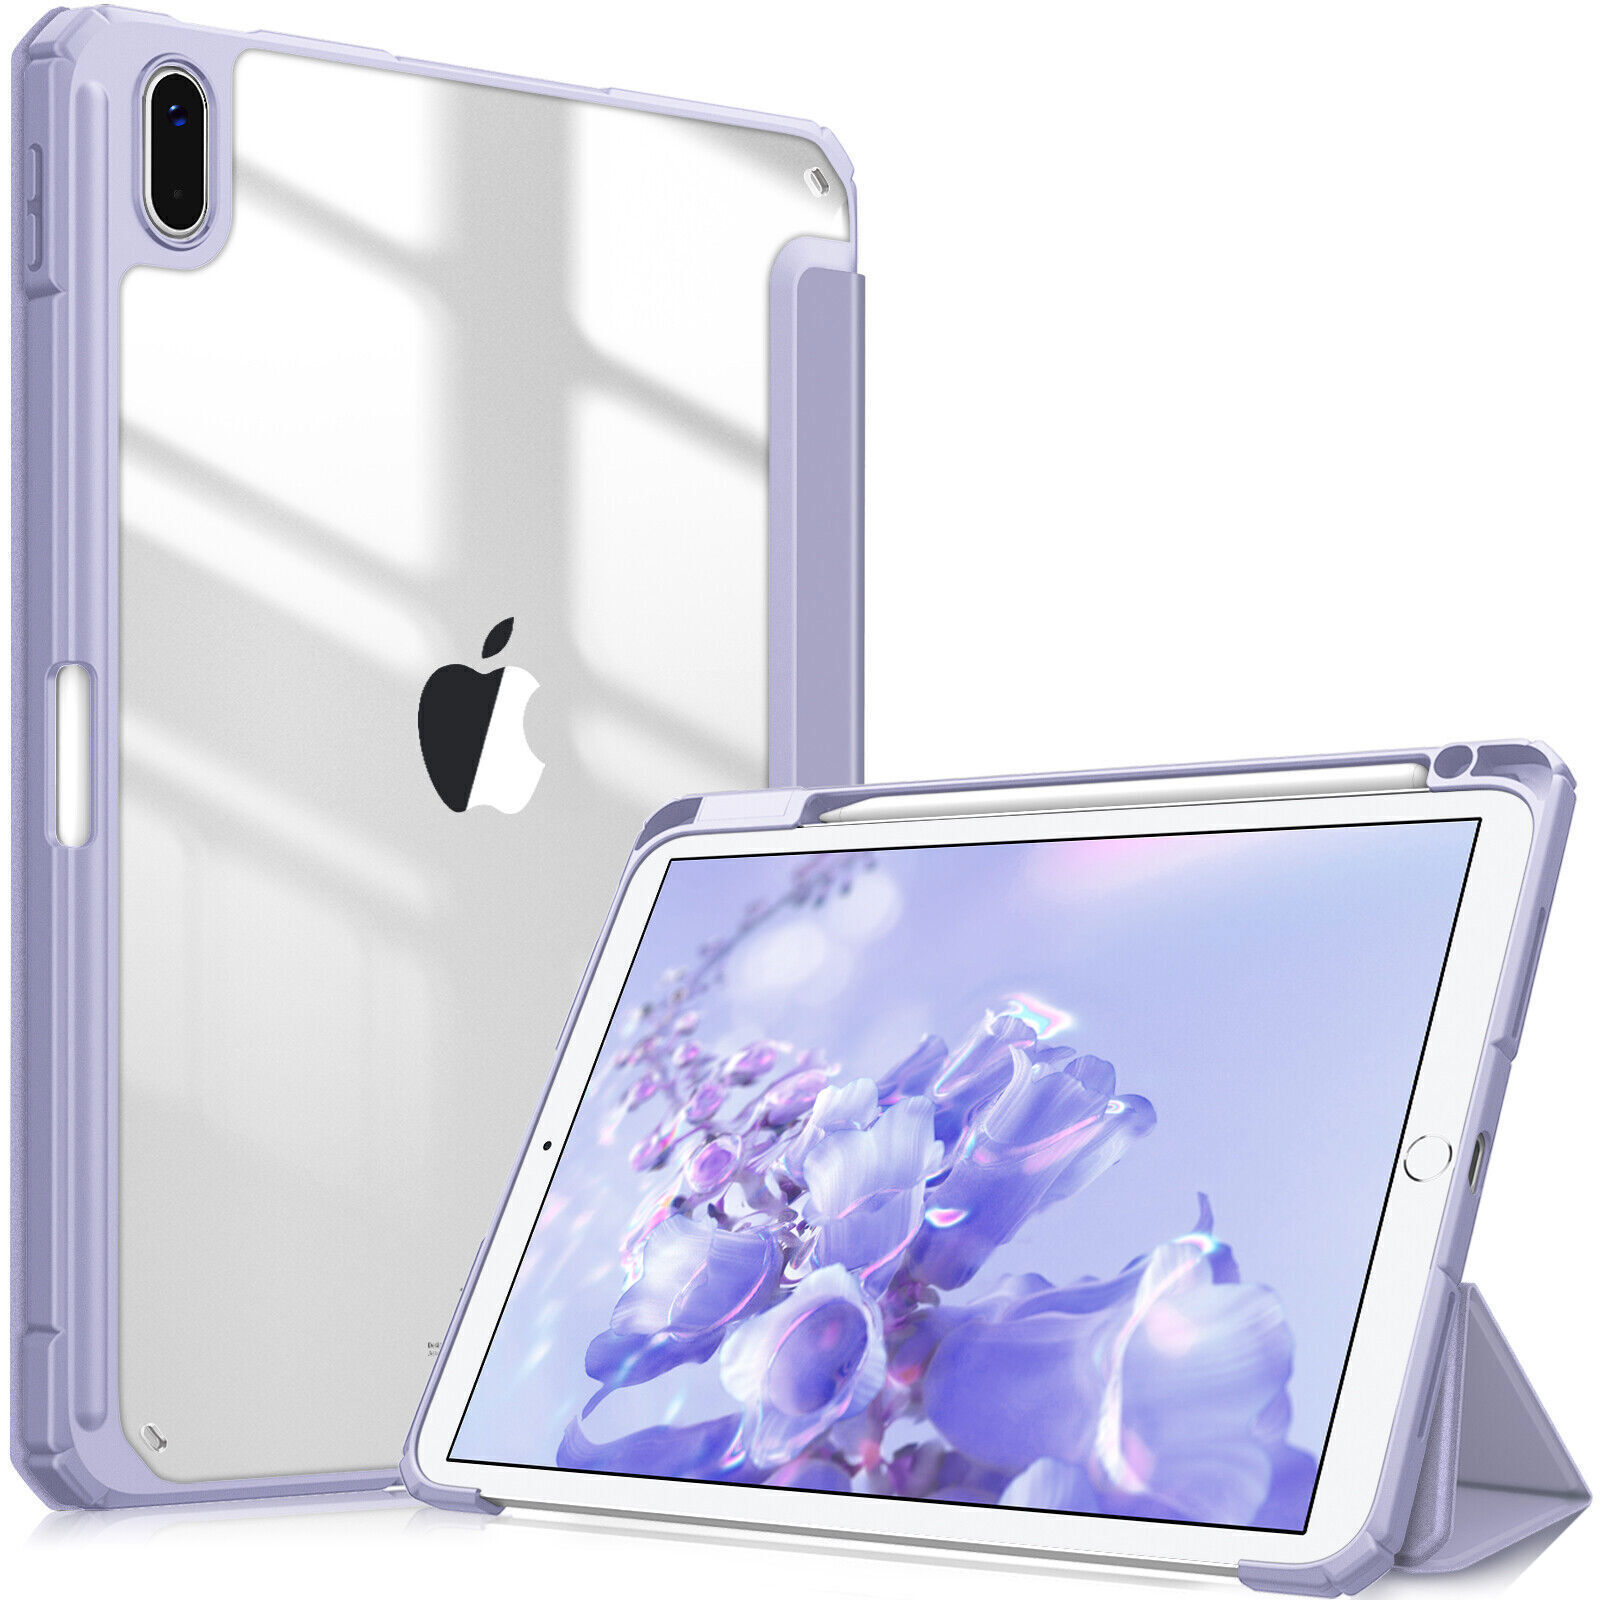 Slim Case for iPad 10th Gen (2022) Clear Back Shell Shockproof Smart Stand Cover